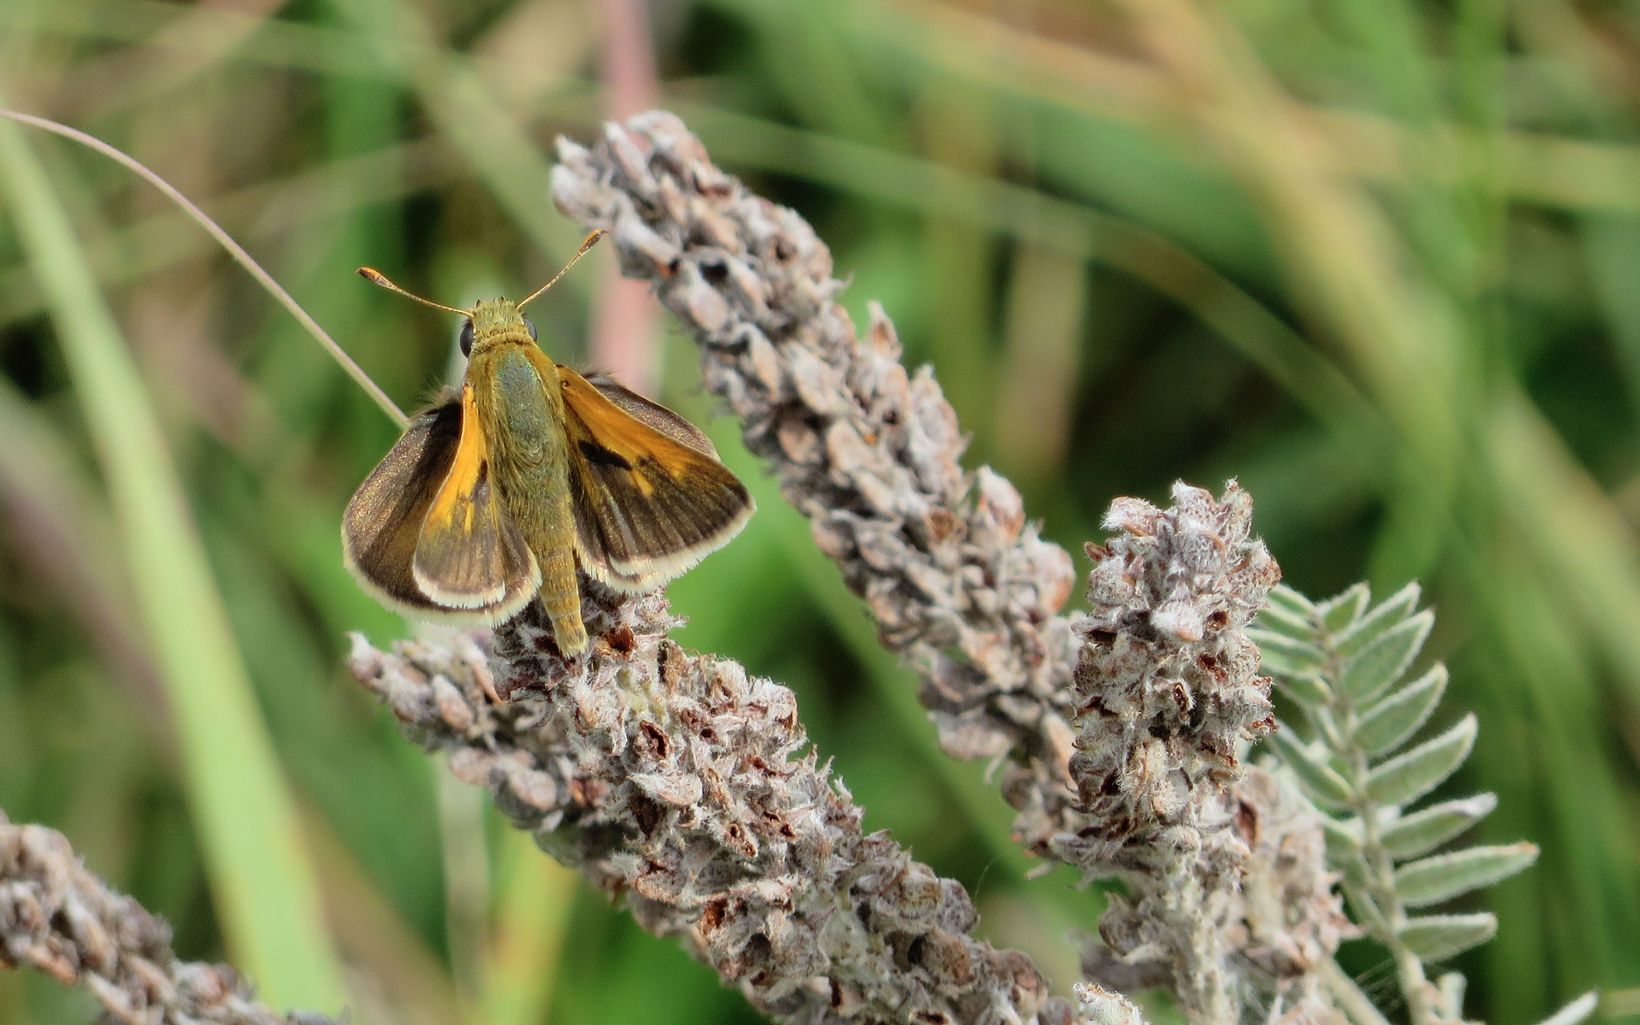 The Ottoe skipper or prairie skipper butterfly (Hesperis ottoe) is dependent on open, native prairie that is well-managed for plant and habitat diversity.